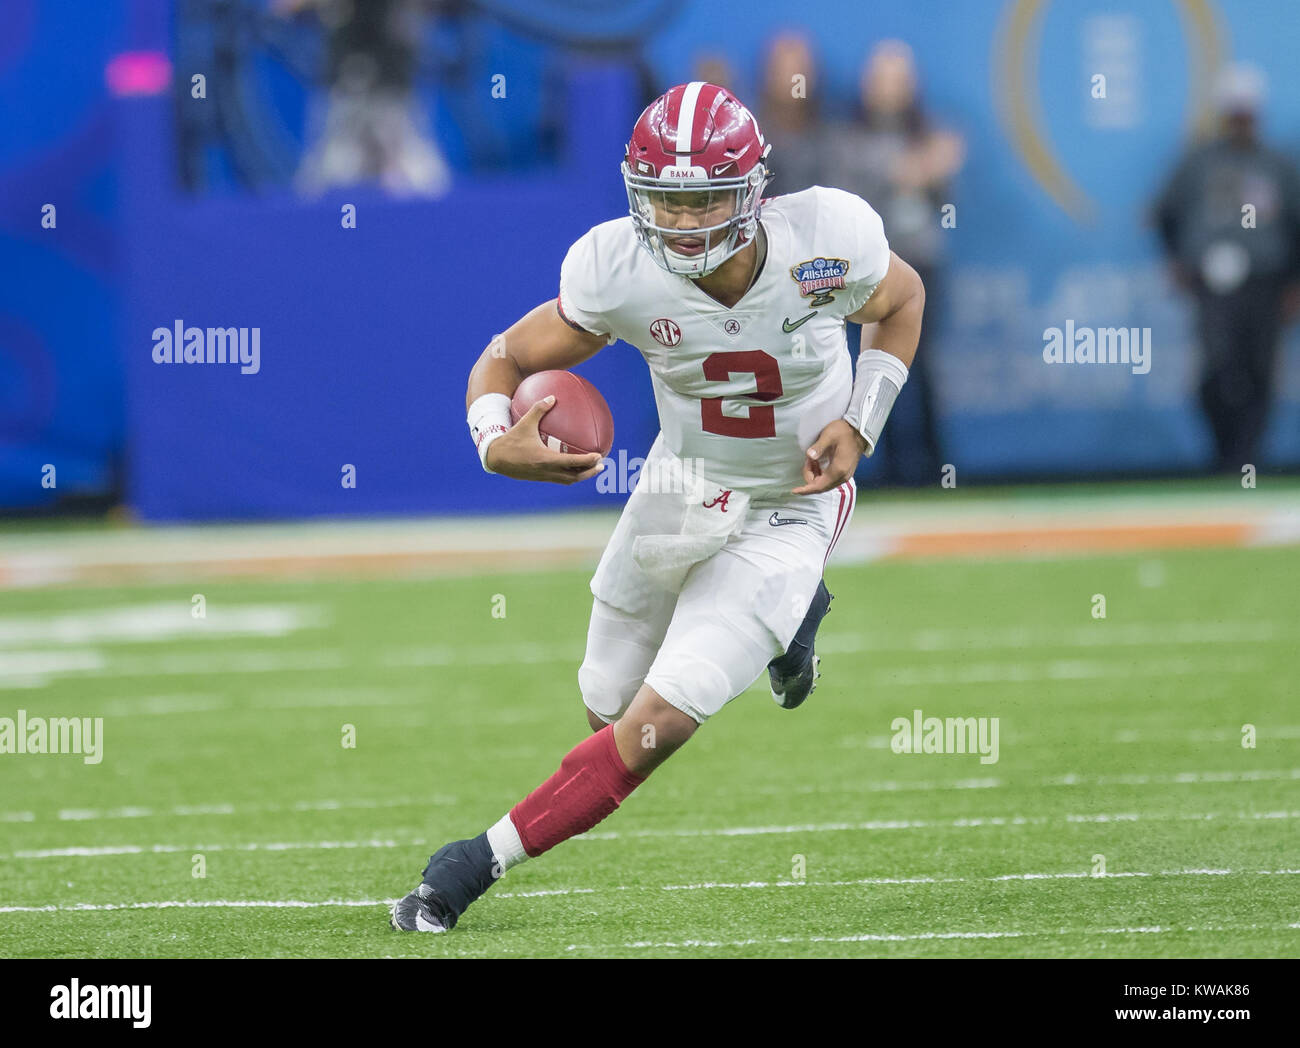 New Orleans, LA, USA. 1st Jan, 2018. Alabama QB Jalen Hurts #2 runs with the ball during the Allstate Sugar Bowl football game between the Clemson Tigers and the Alabama Crimson Tide at the Mercedes-Benz Supedome in New Orleans, LA. Kyle Okita/CSM/Alamy Live News Stock Photo